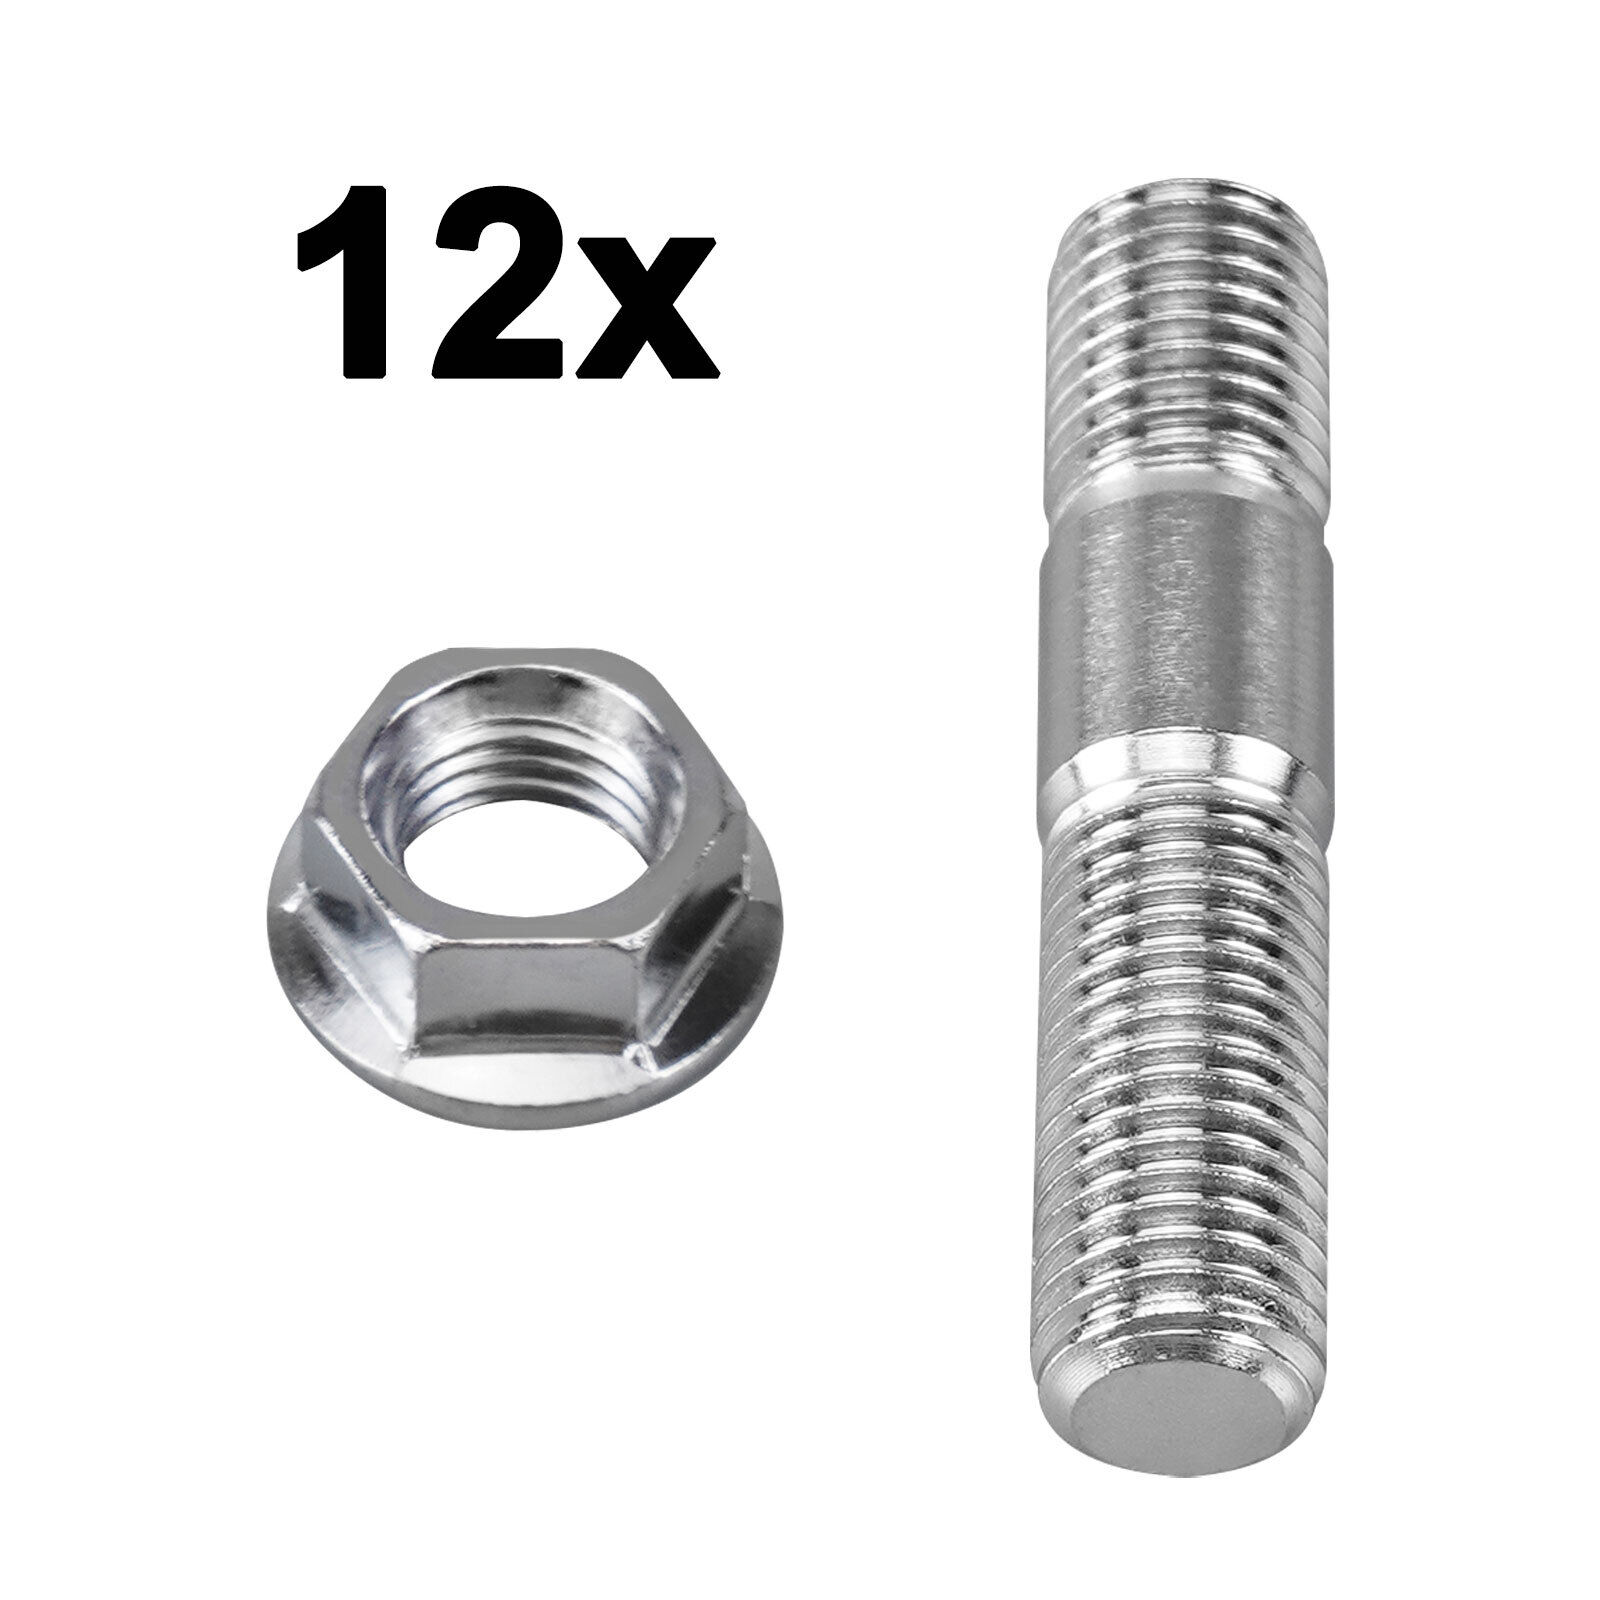 M10 x 1.25 12pcs Manifold Stud Assembly Bolts Kit Stainless Steel Nuts